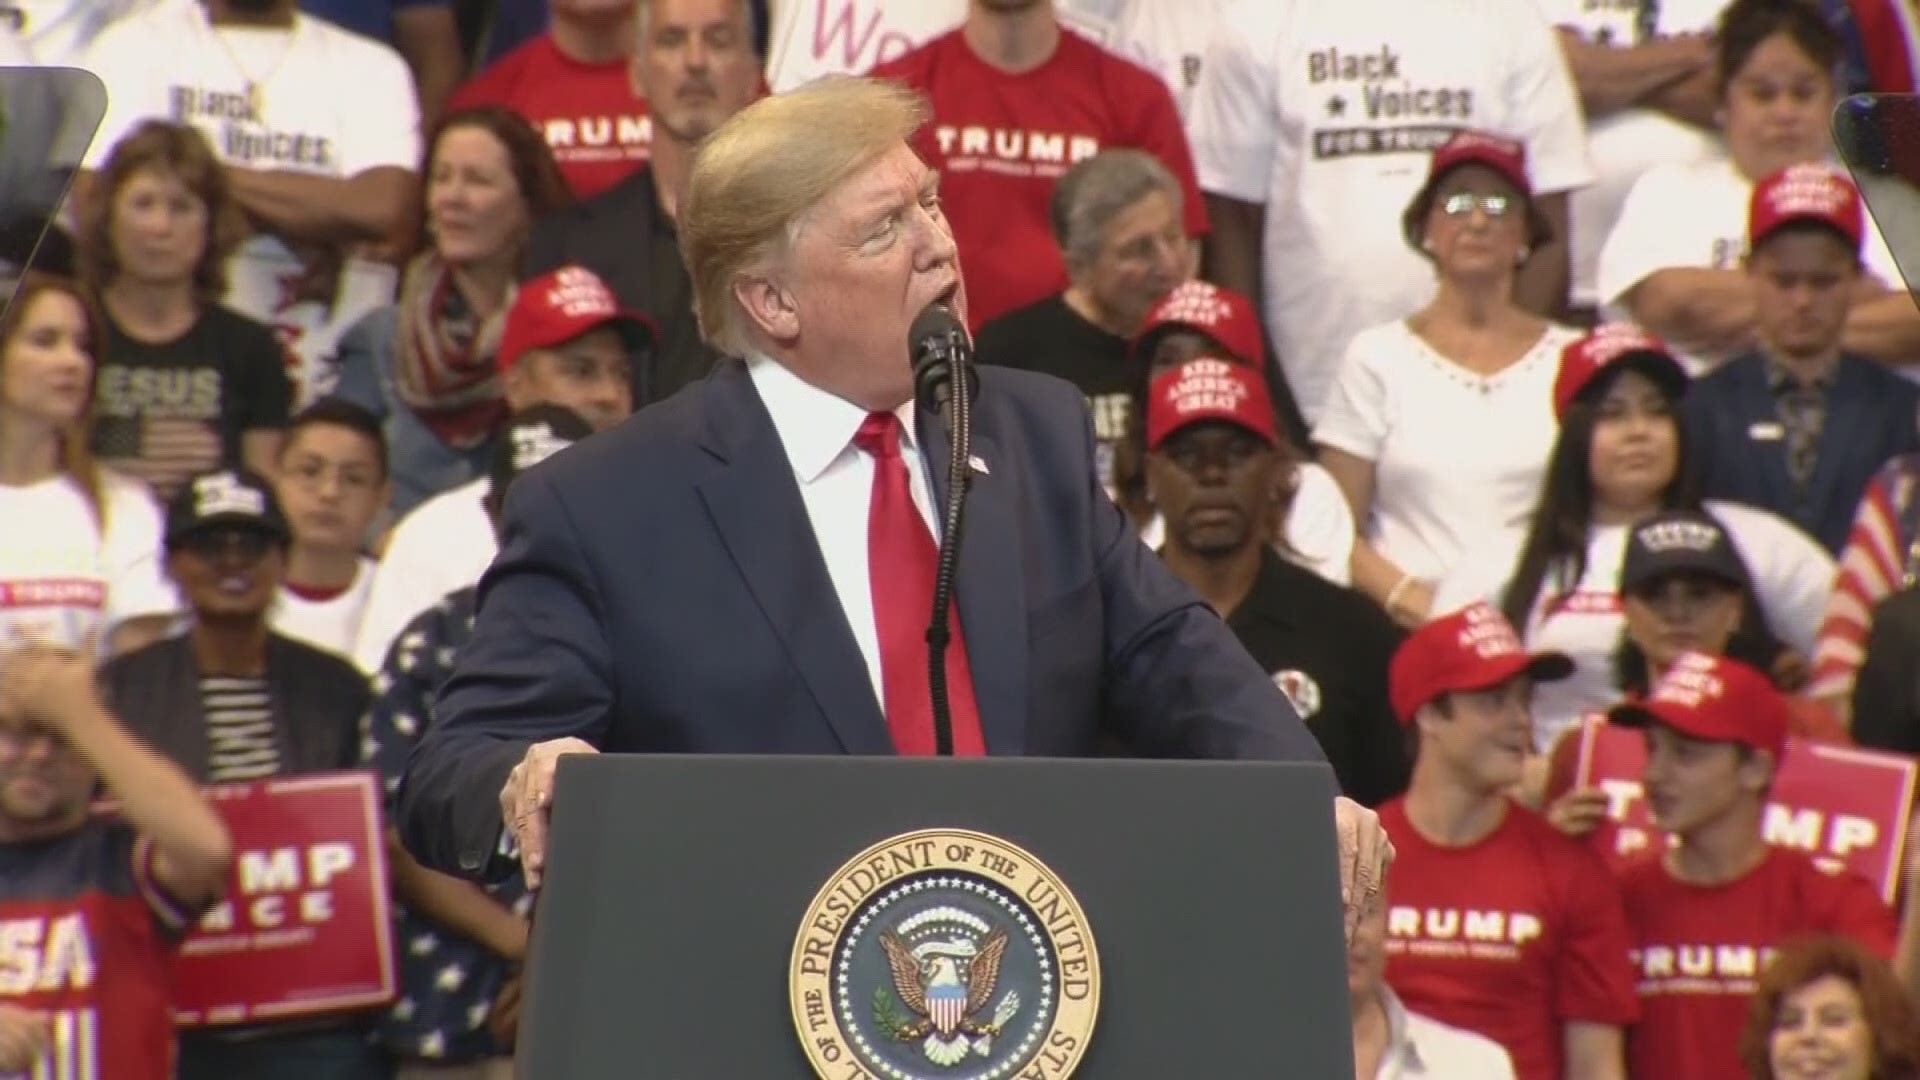 President Donald Trump tells the crowd that “some people want to change the name Thanksgiving, they don't want to use the term Thanksgiving.”